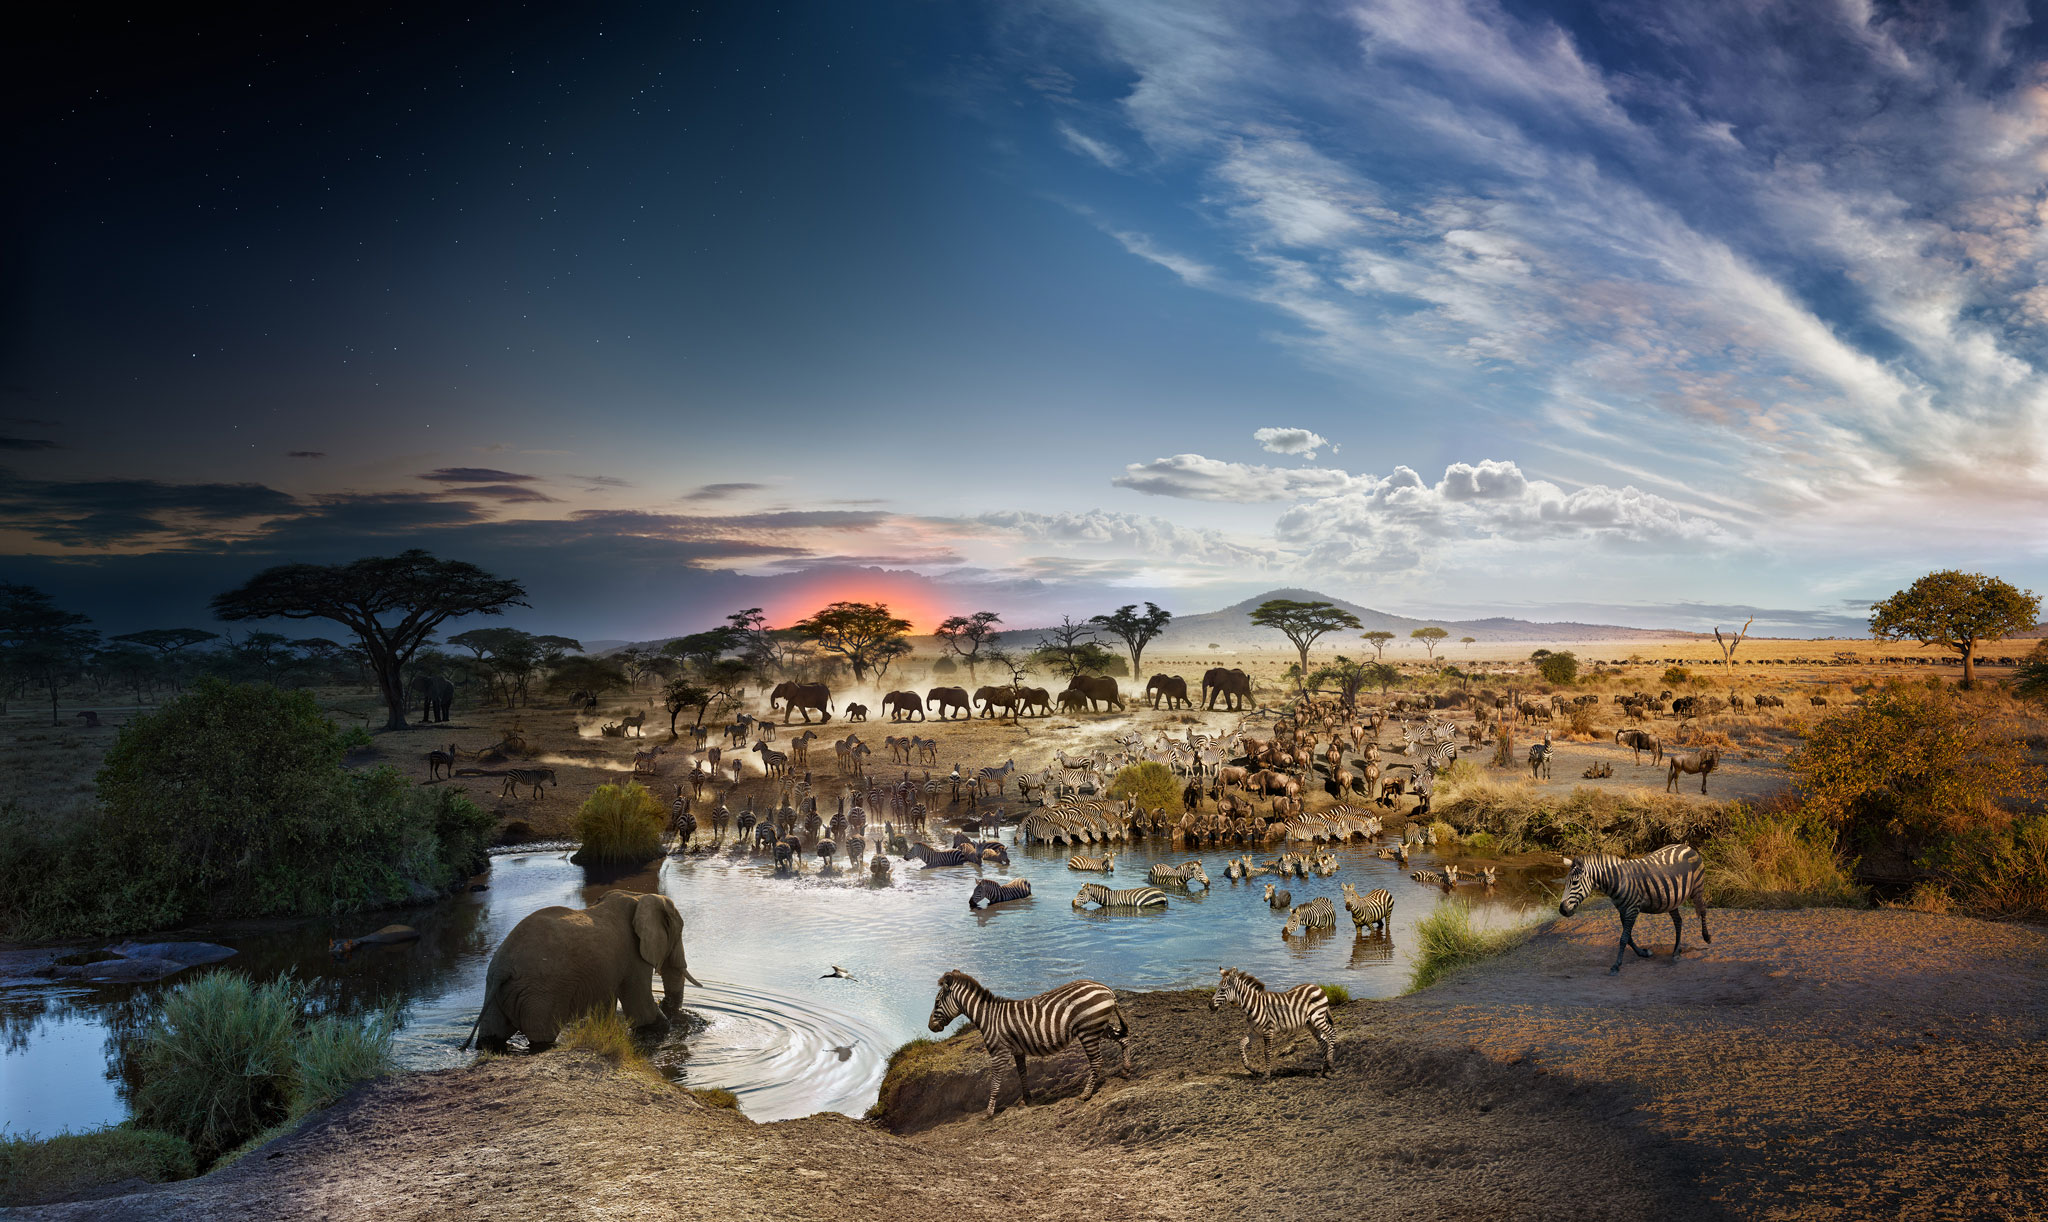 This Photo Was Shot Over the Course of 26 Hours at an African Watering Hole